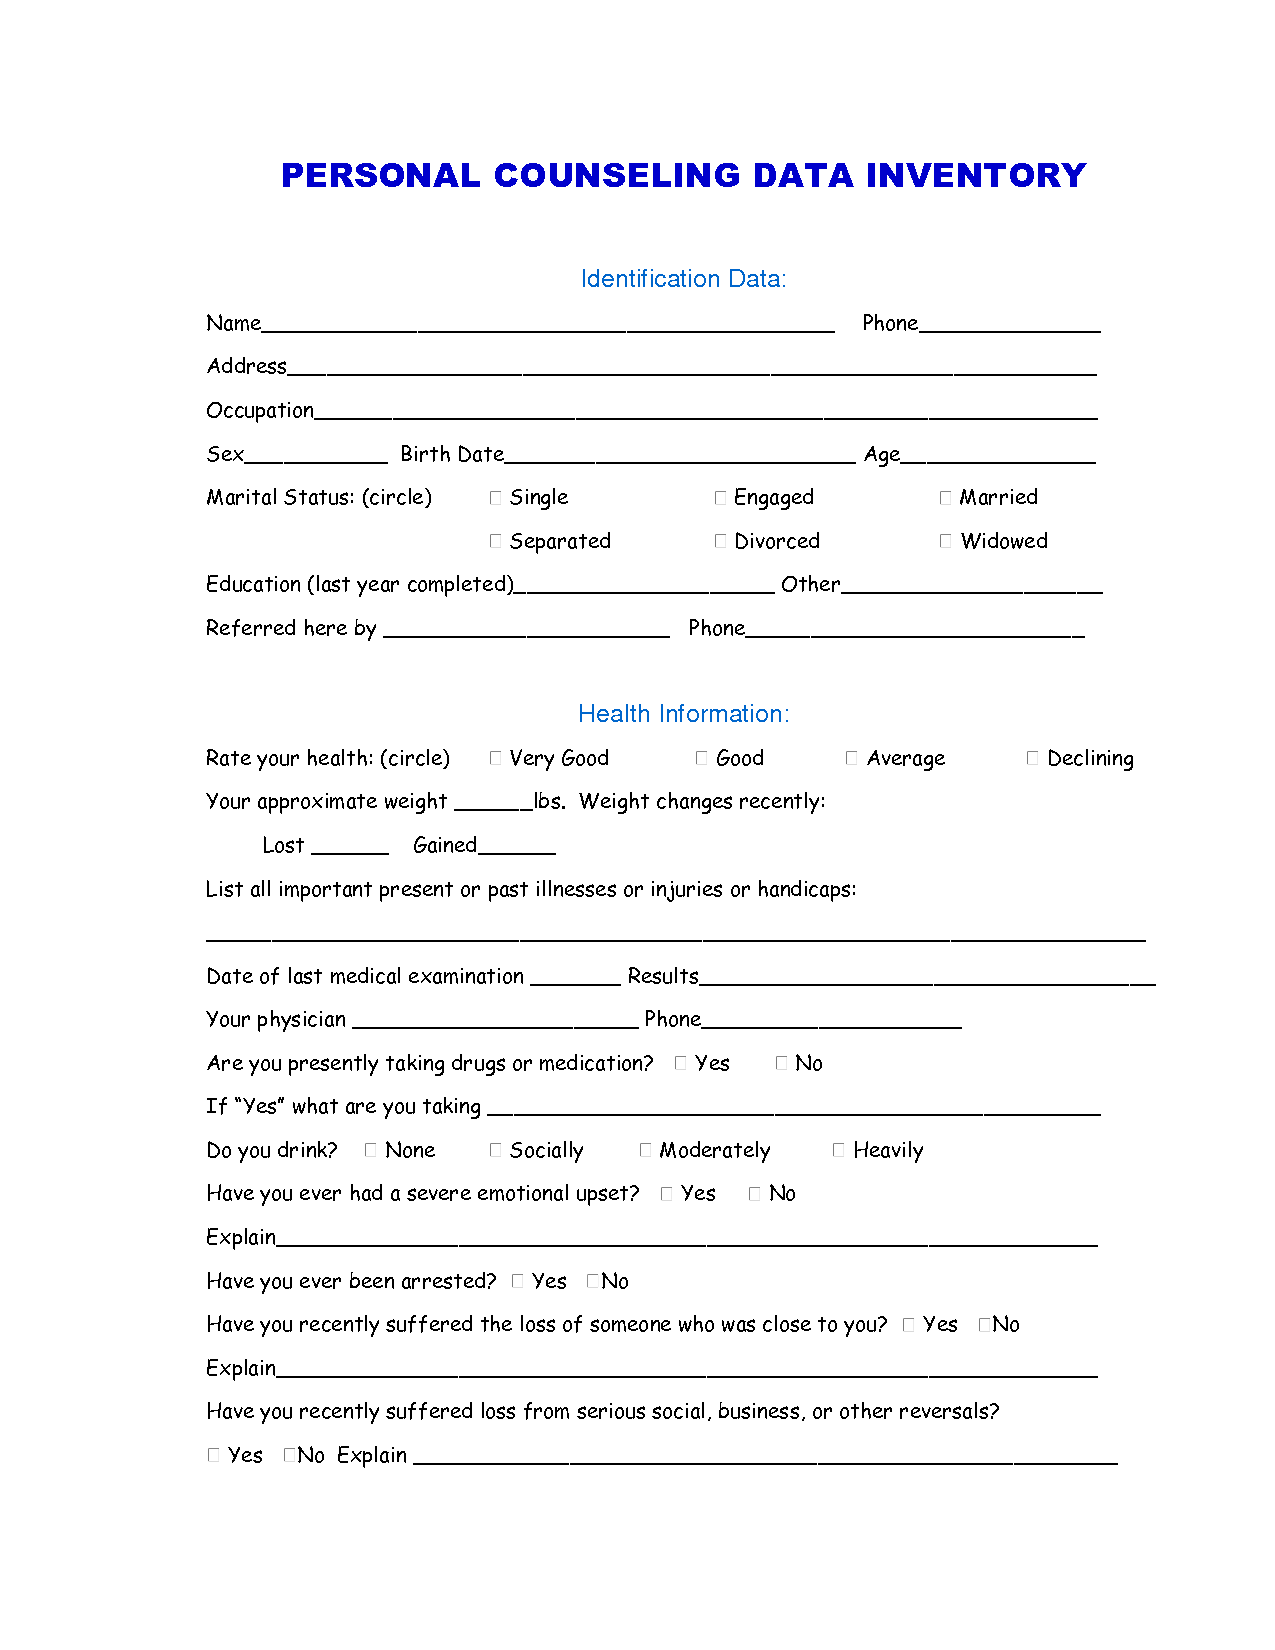 at-home-marriage-counseling-worksheets